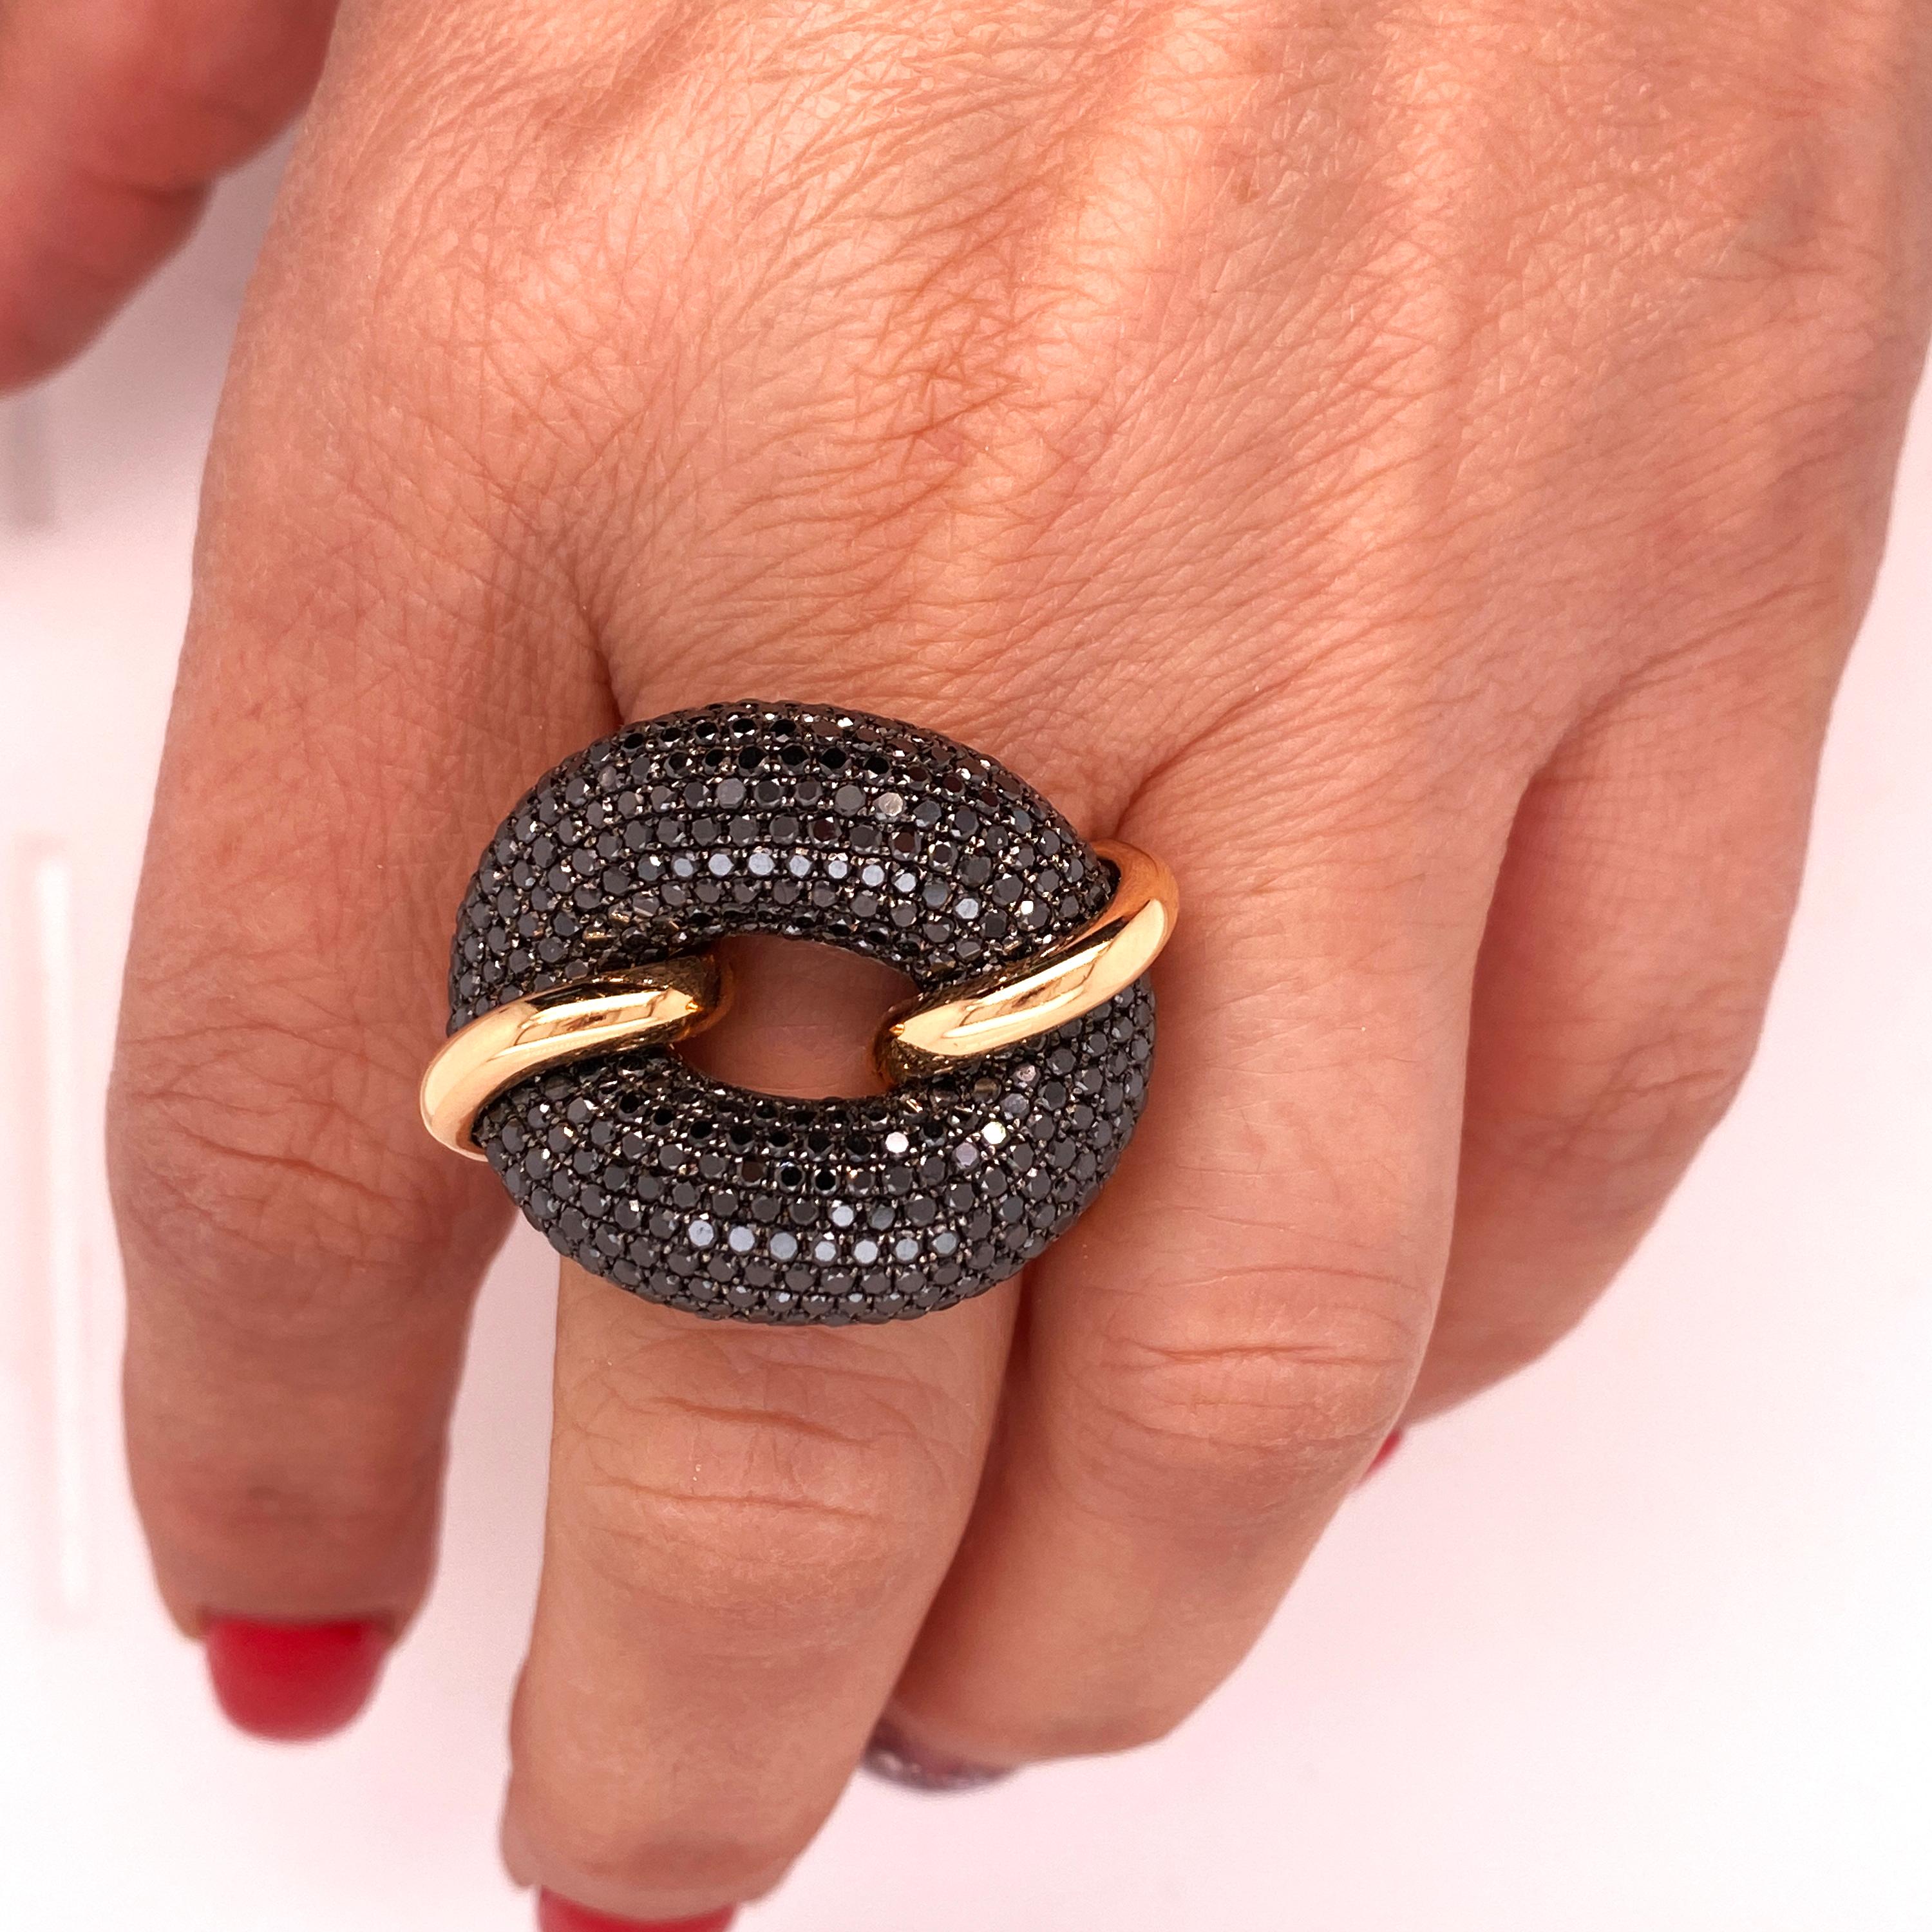 18K Rose Gold Black Diamonds Oval Face Cocktail Ring

6.50 carat apprx. Black Diamonds total weight

Ring face is an oval with black diamonds pavé set. Band of the ring also has a link-like design

Ring face is 0.96 inch in width. 0.50 inch band